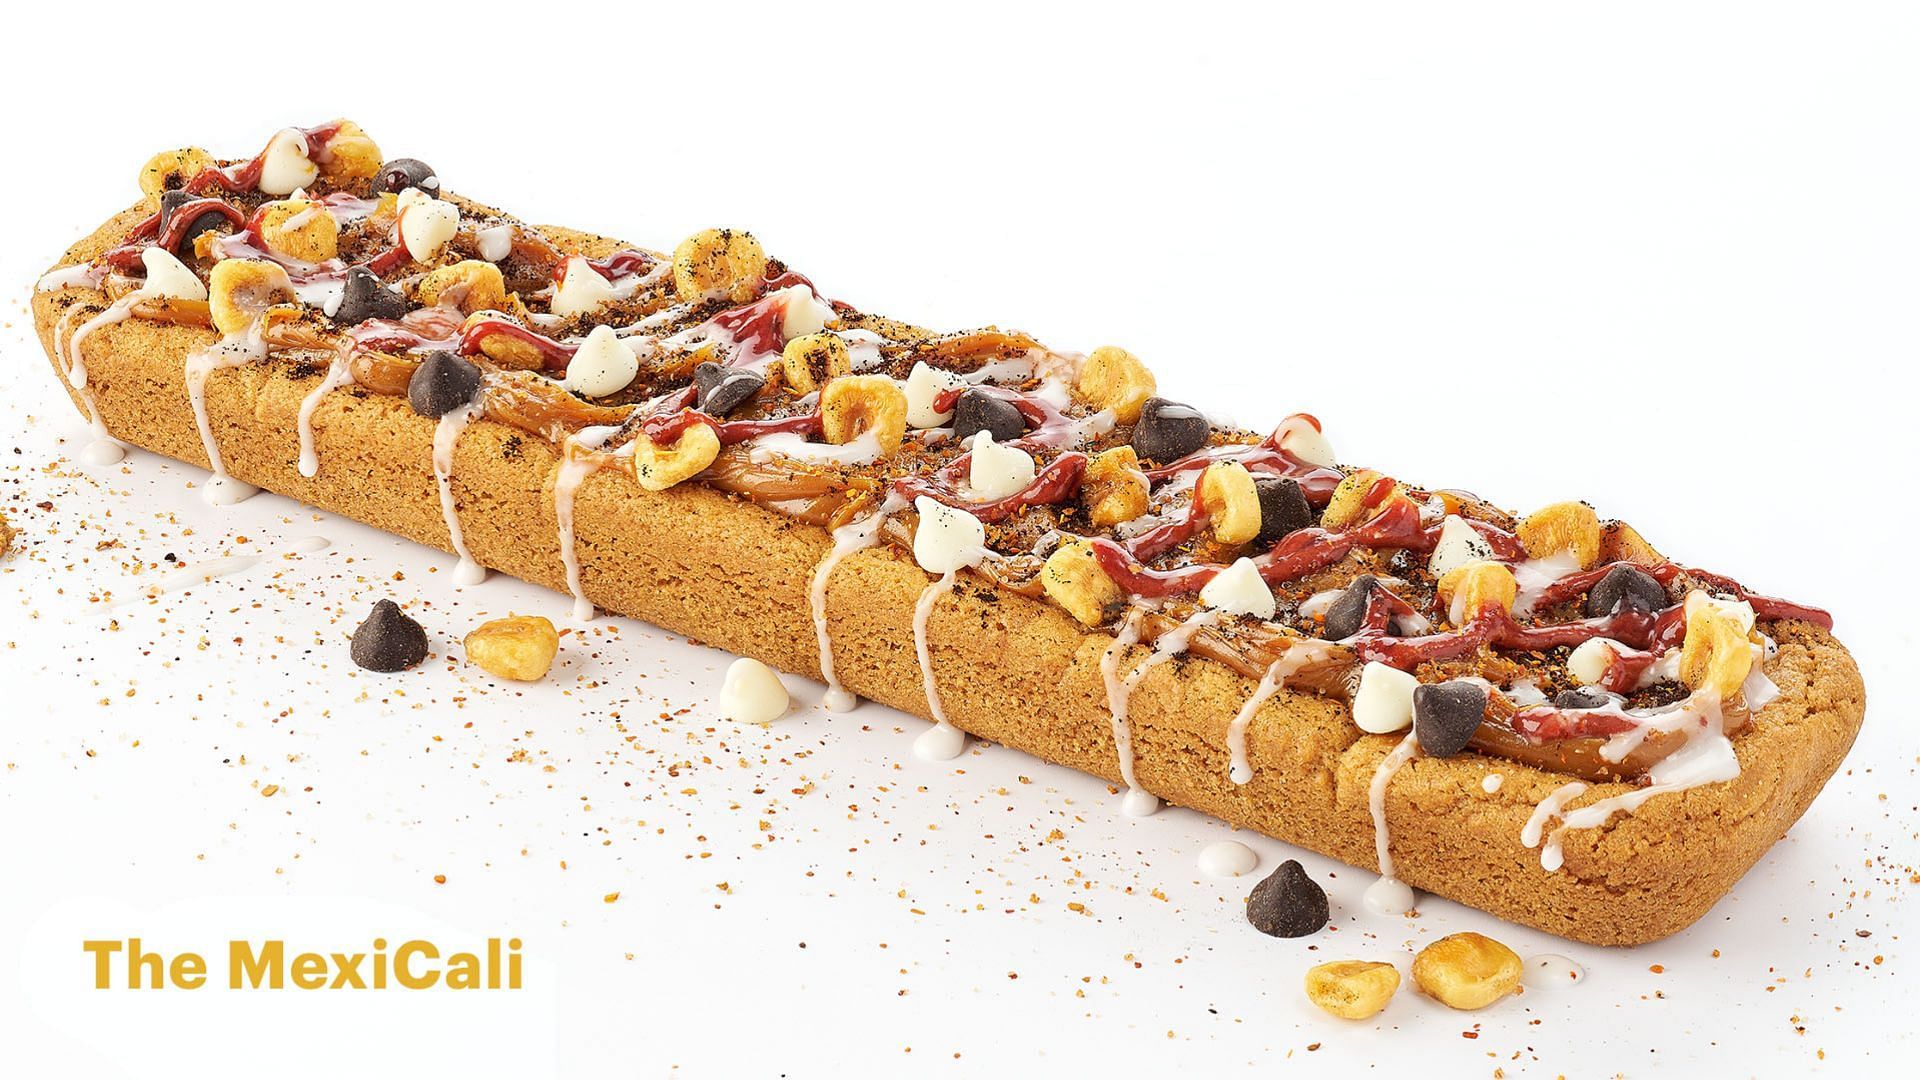 Subway&rsquo;s Footlong Cookie - The MexiCali (Image via Subway)